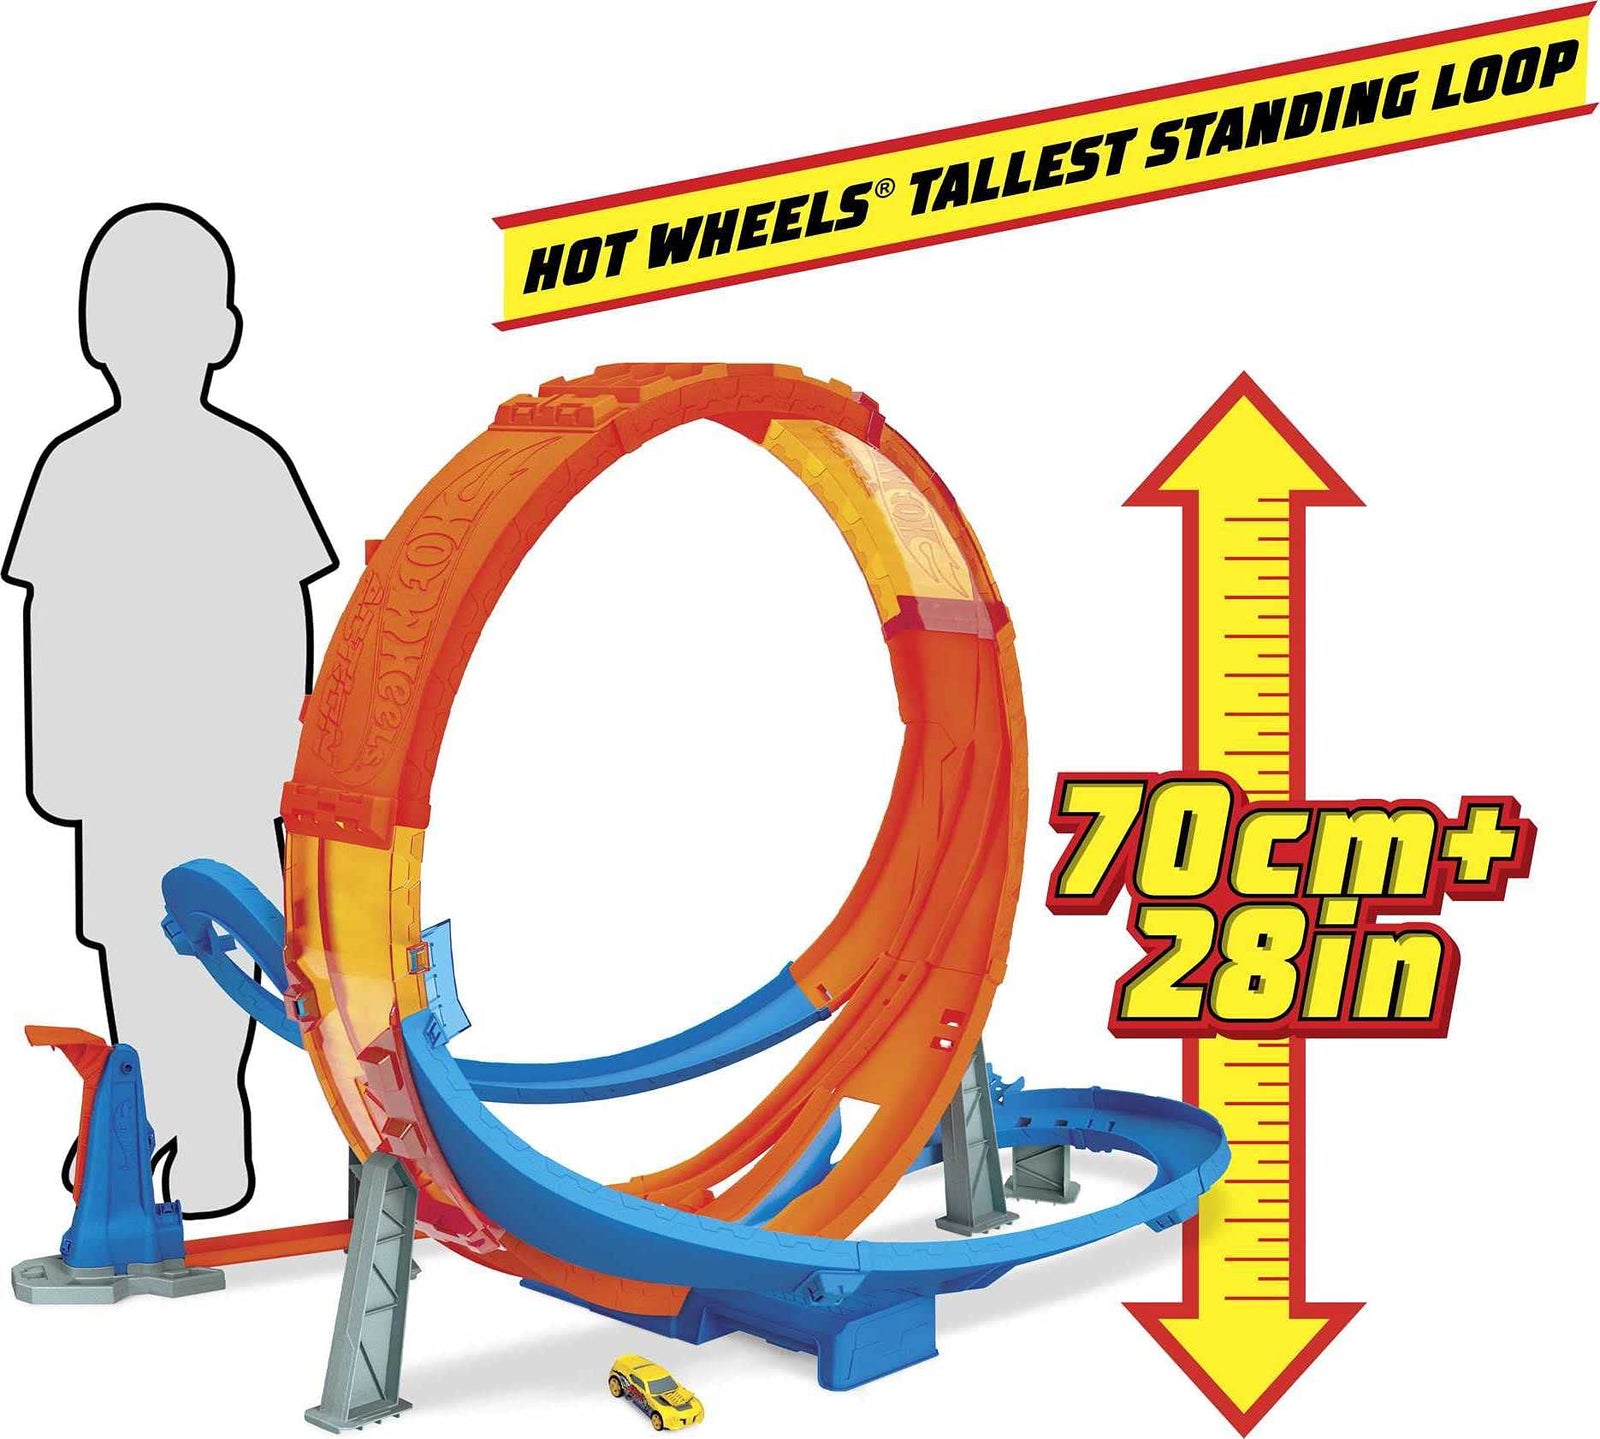 Hot Wheels Massive Loop Mayhem Track Set with Huge 28-Inch Wide Track Loop Slam Launcher, Battery Box & 1 1:64 Scale Car, Designed for Multi-Car Play, Gift for Kids 5 Years Old & Up